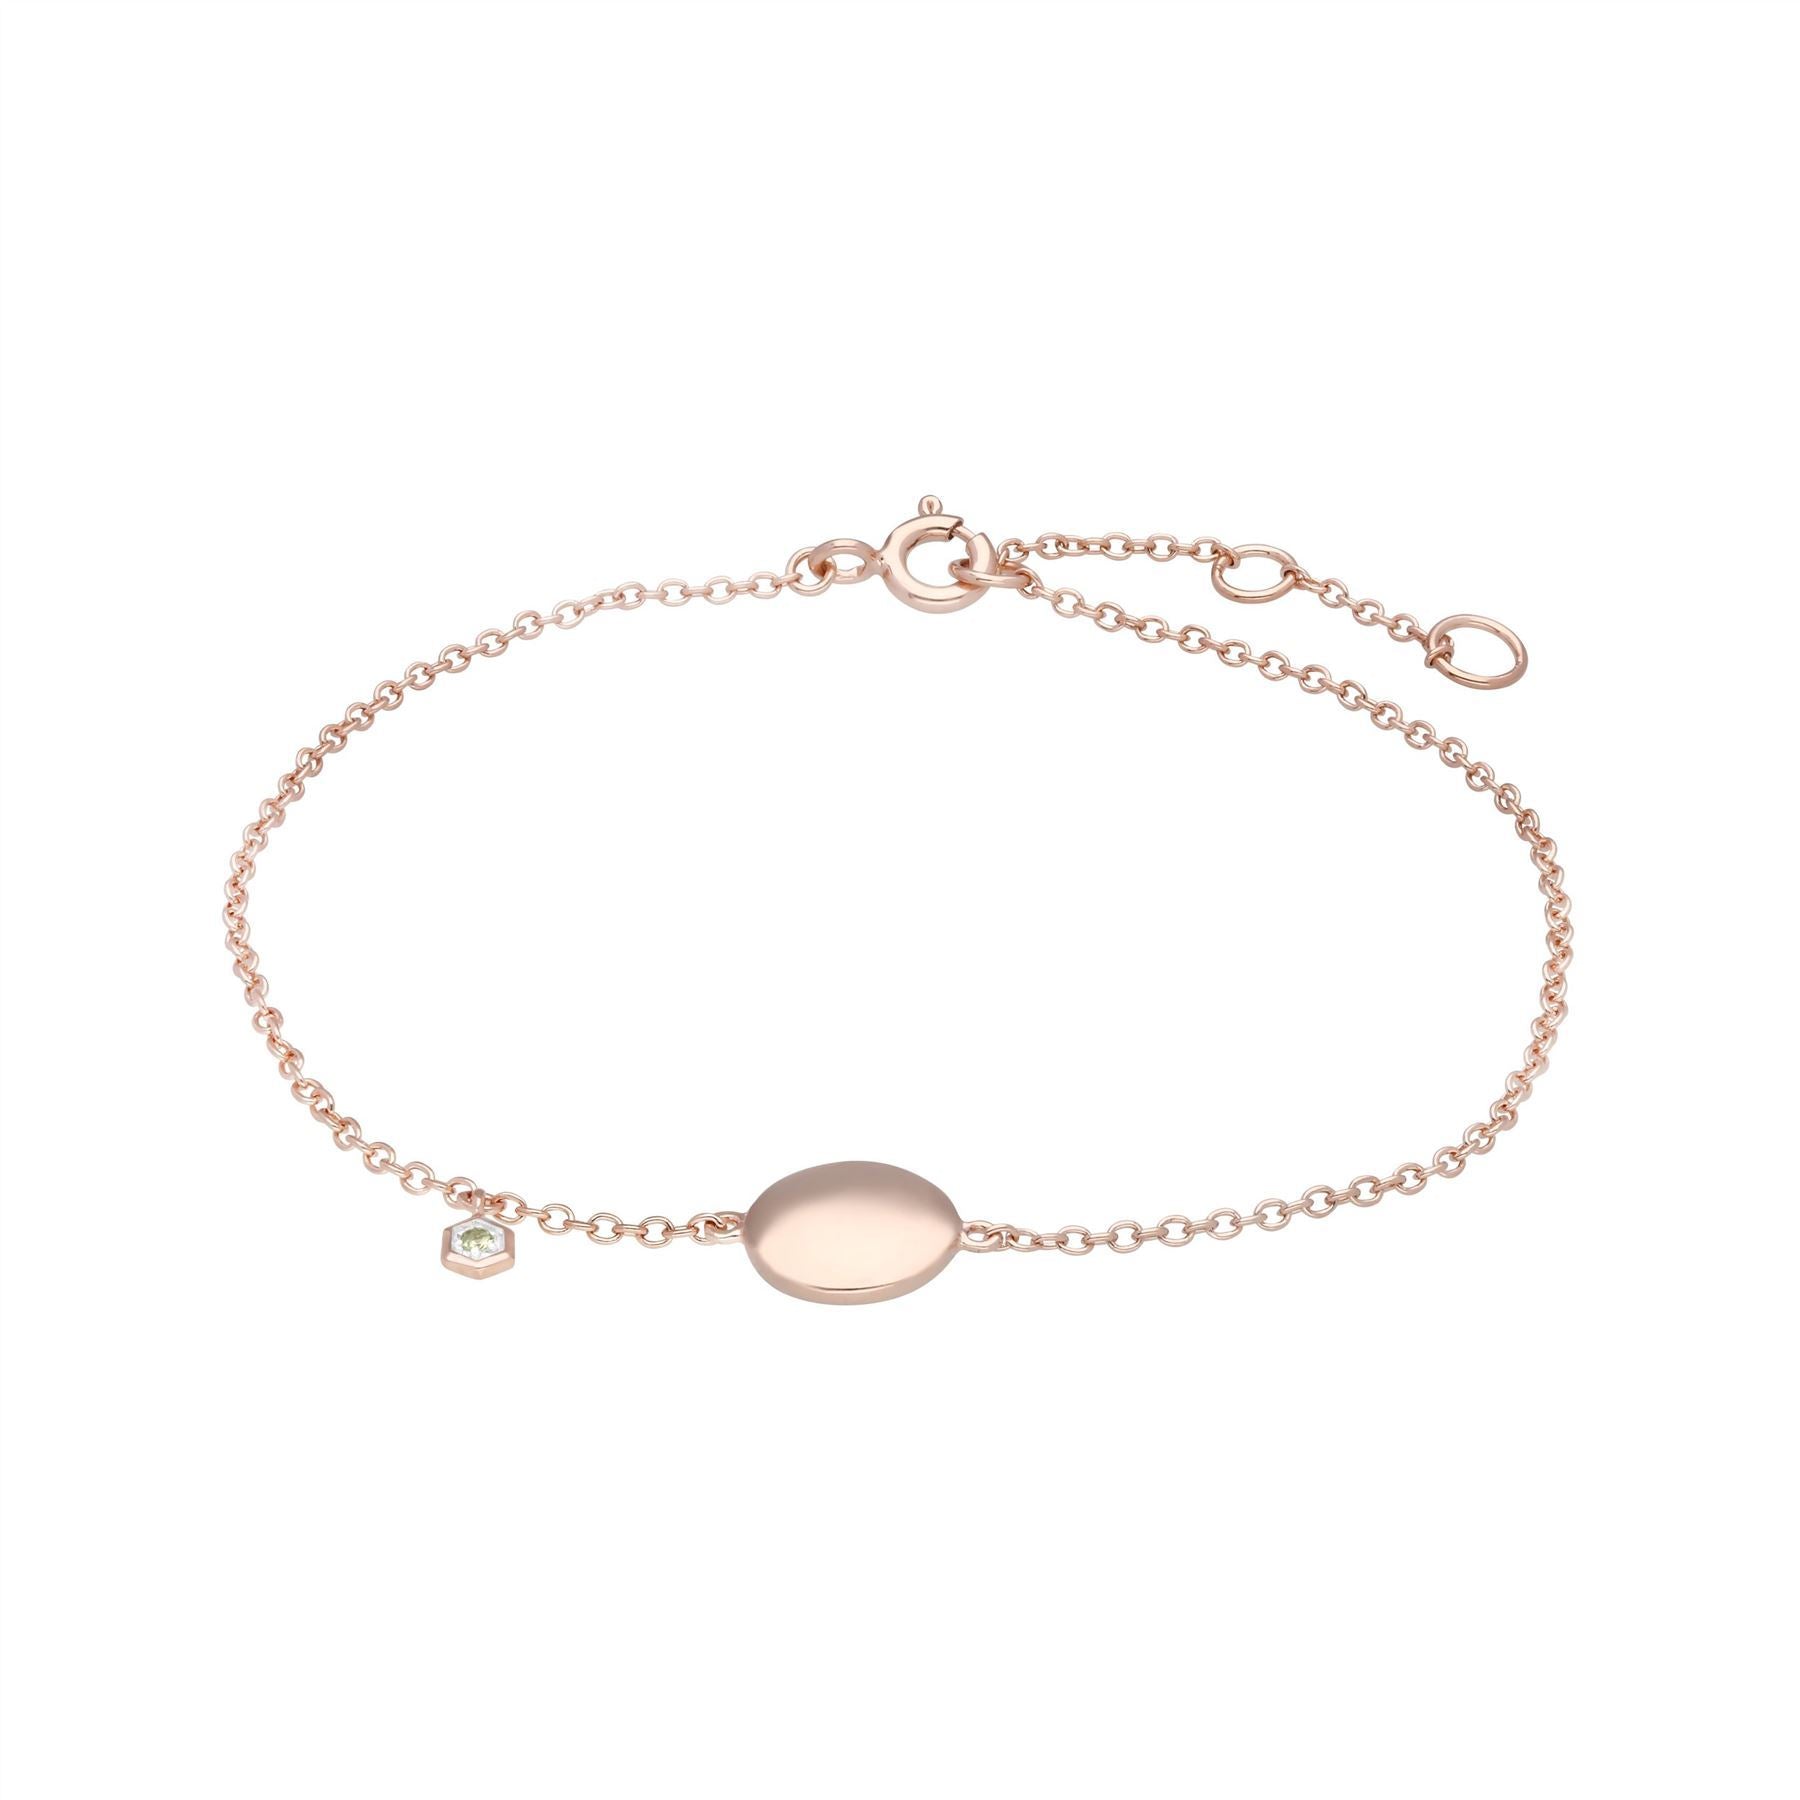 Peridot Engravable Bracelet in Rose Gold Plated Sterling Silver